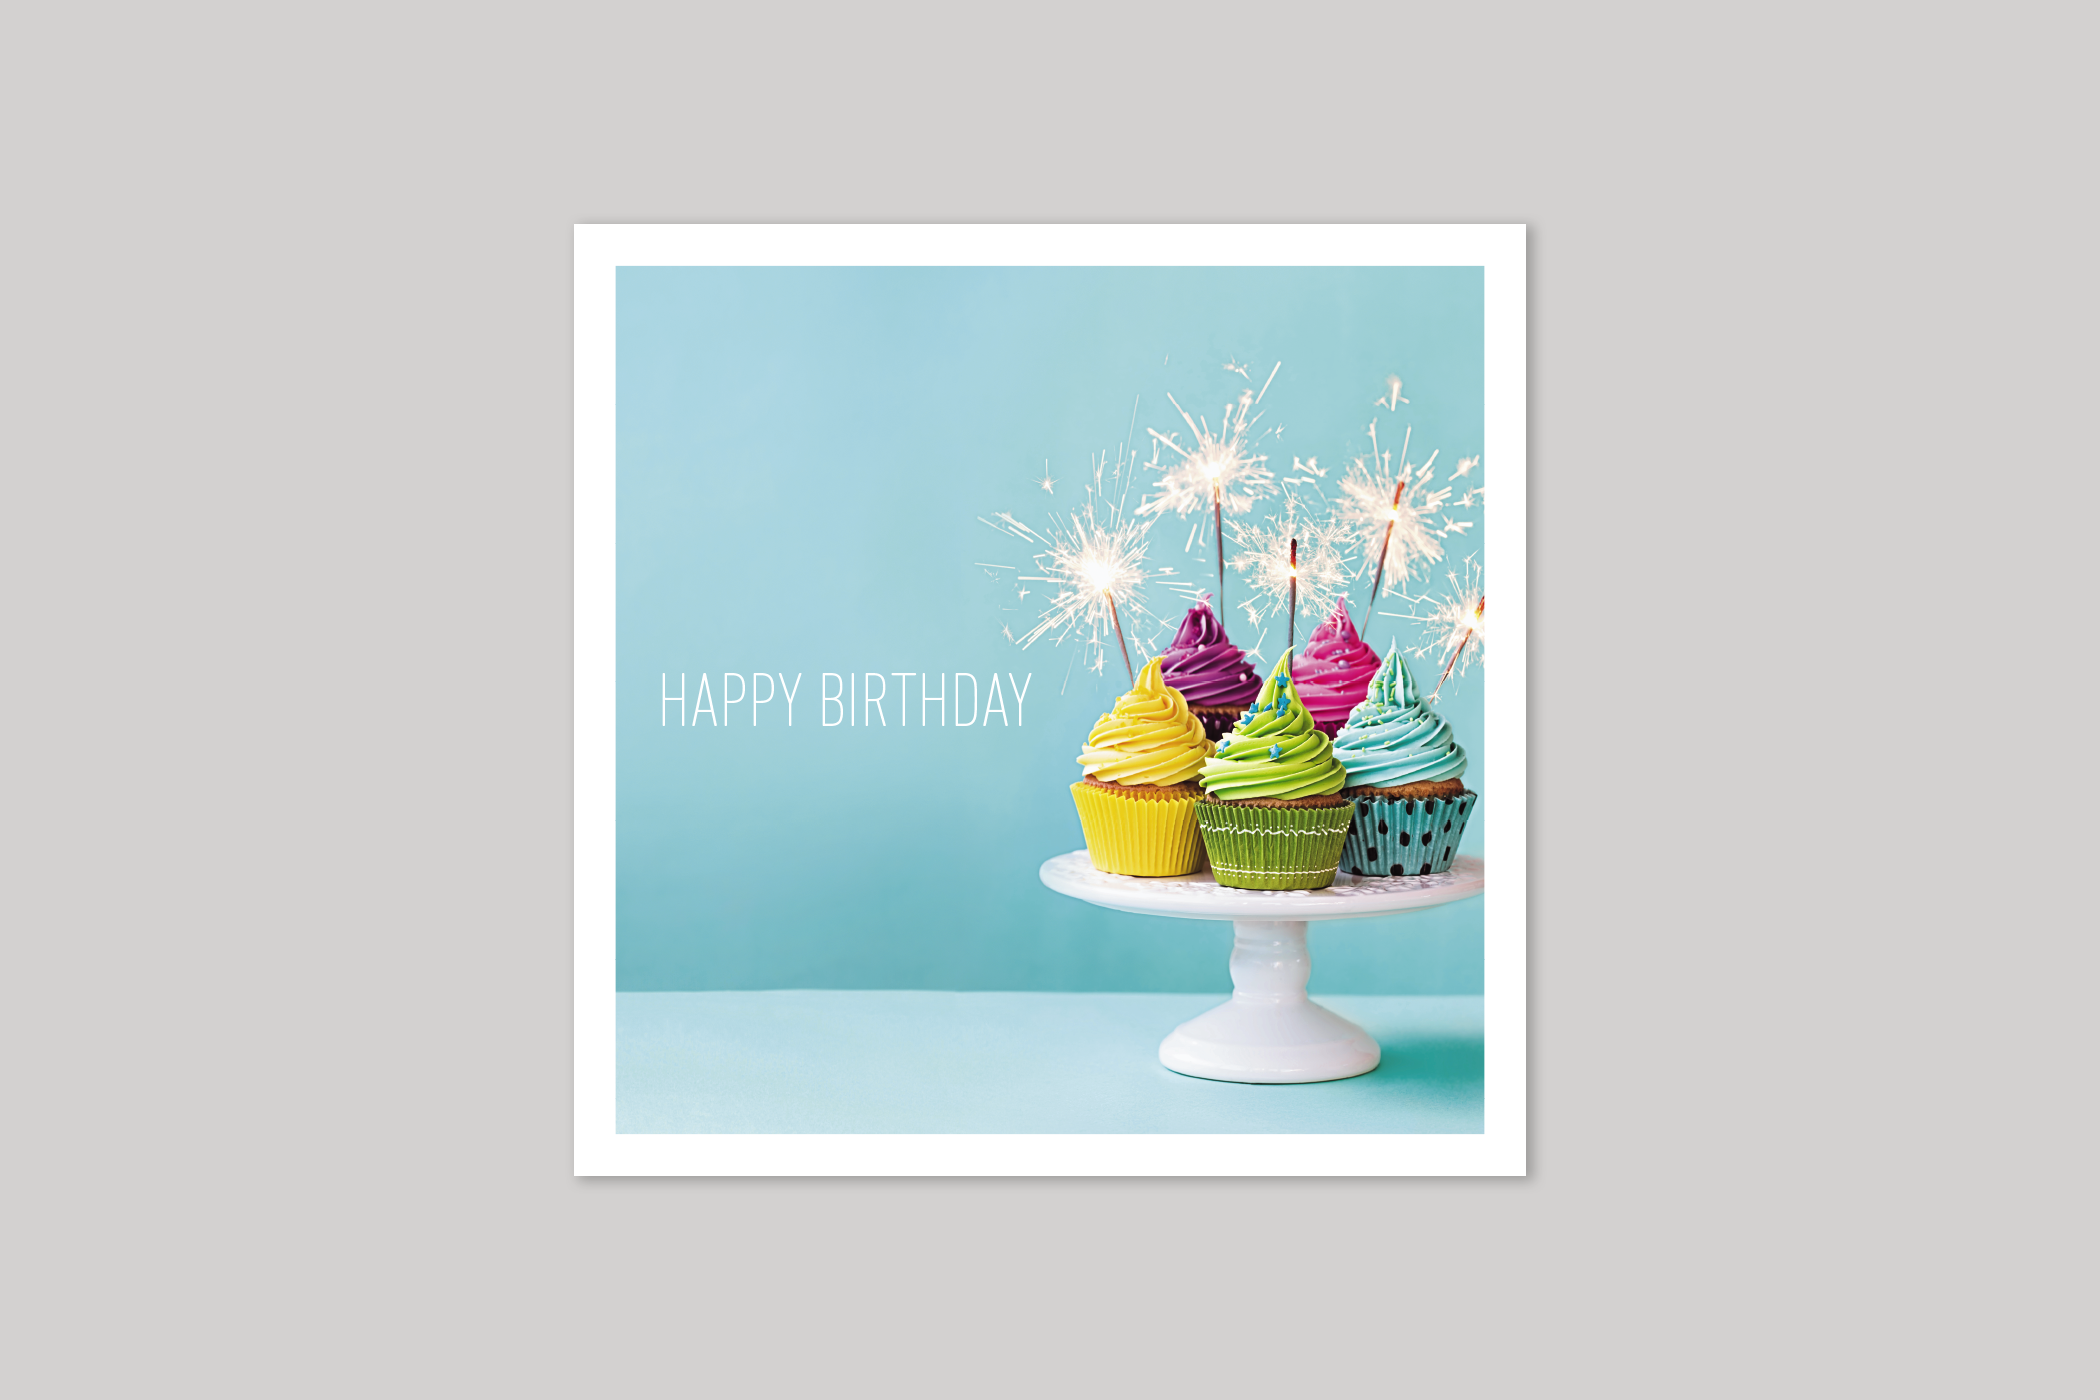 Happy Birthday Cupcakes from Beautiful Days range of contemporary photographic cards by Icon.